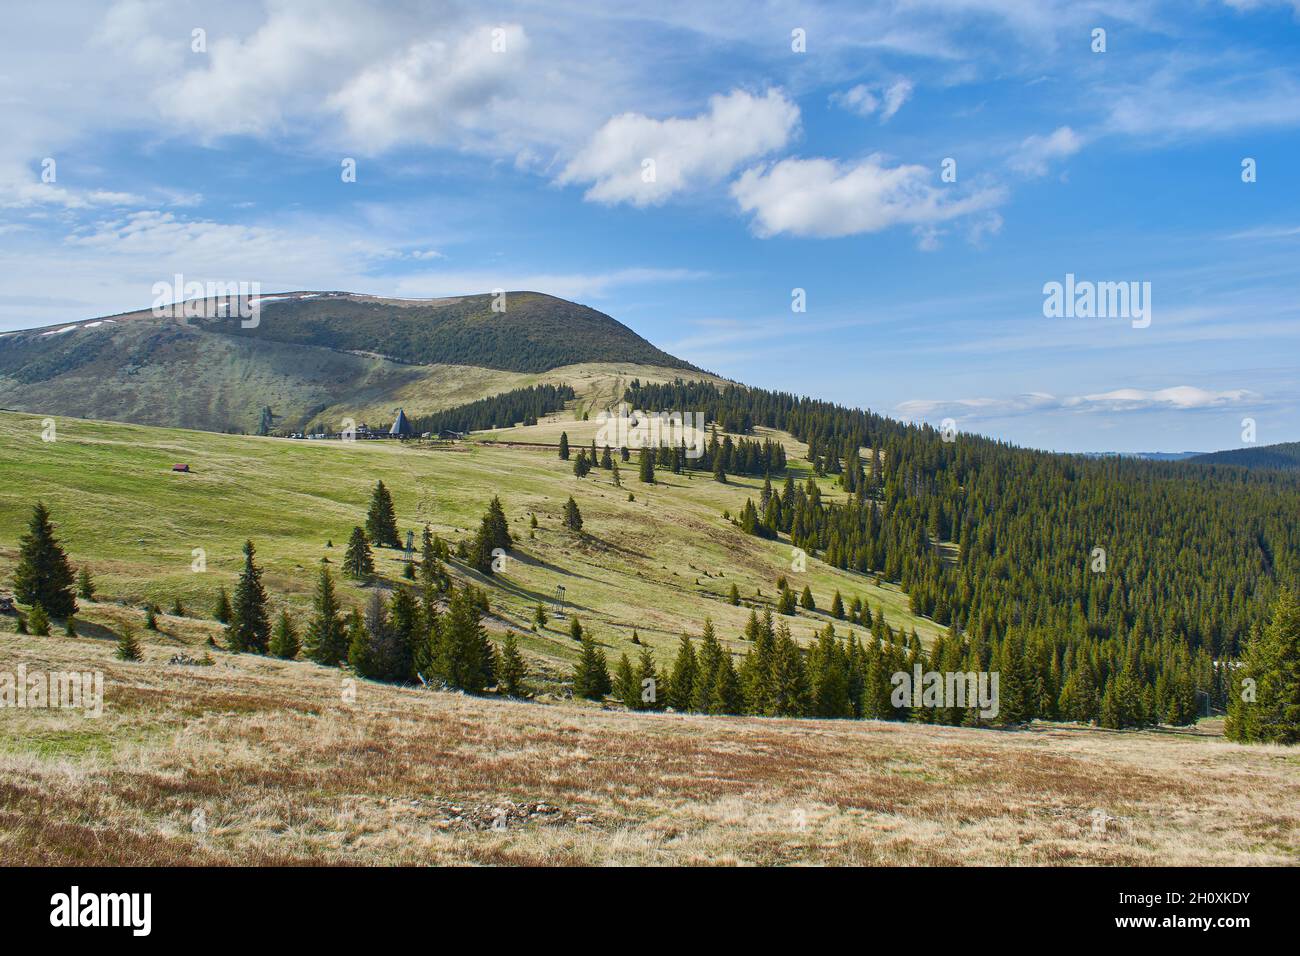 Panoramic view from the ski slope in mountains Sureanu with peak cloud sky and fir trees Stock Photo